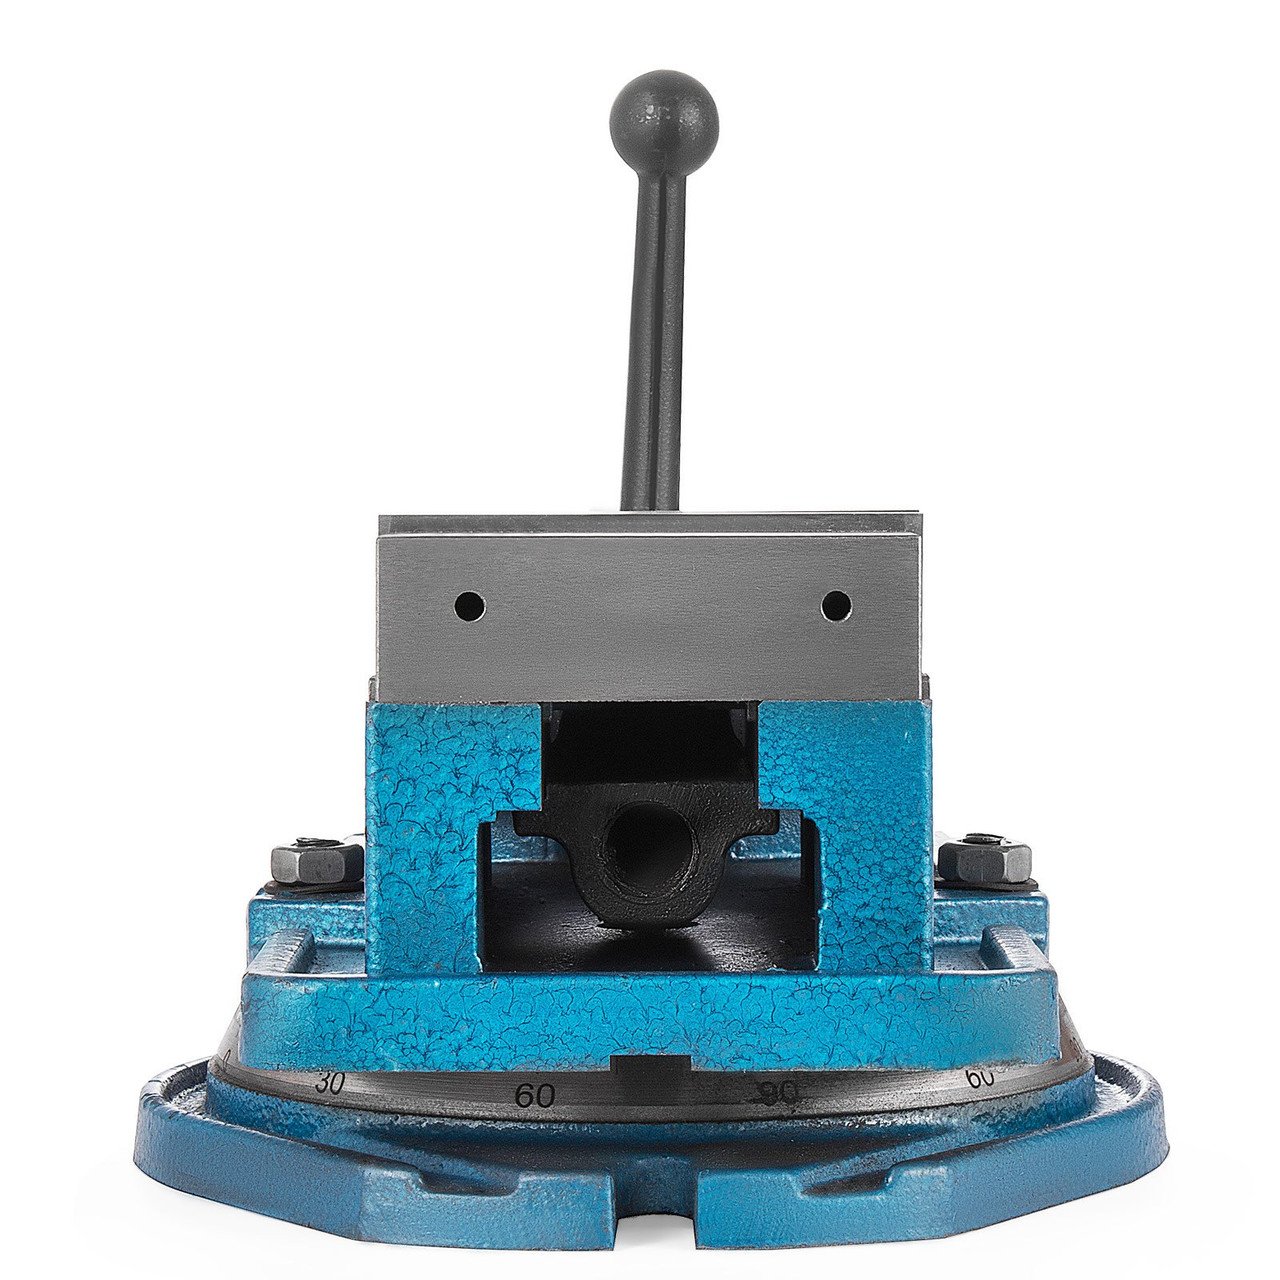 4" Milling Machine Lockdown Vise Swiveling Base Precise Scale Clamping Vise